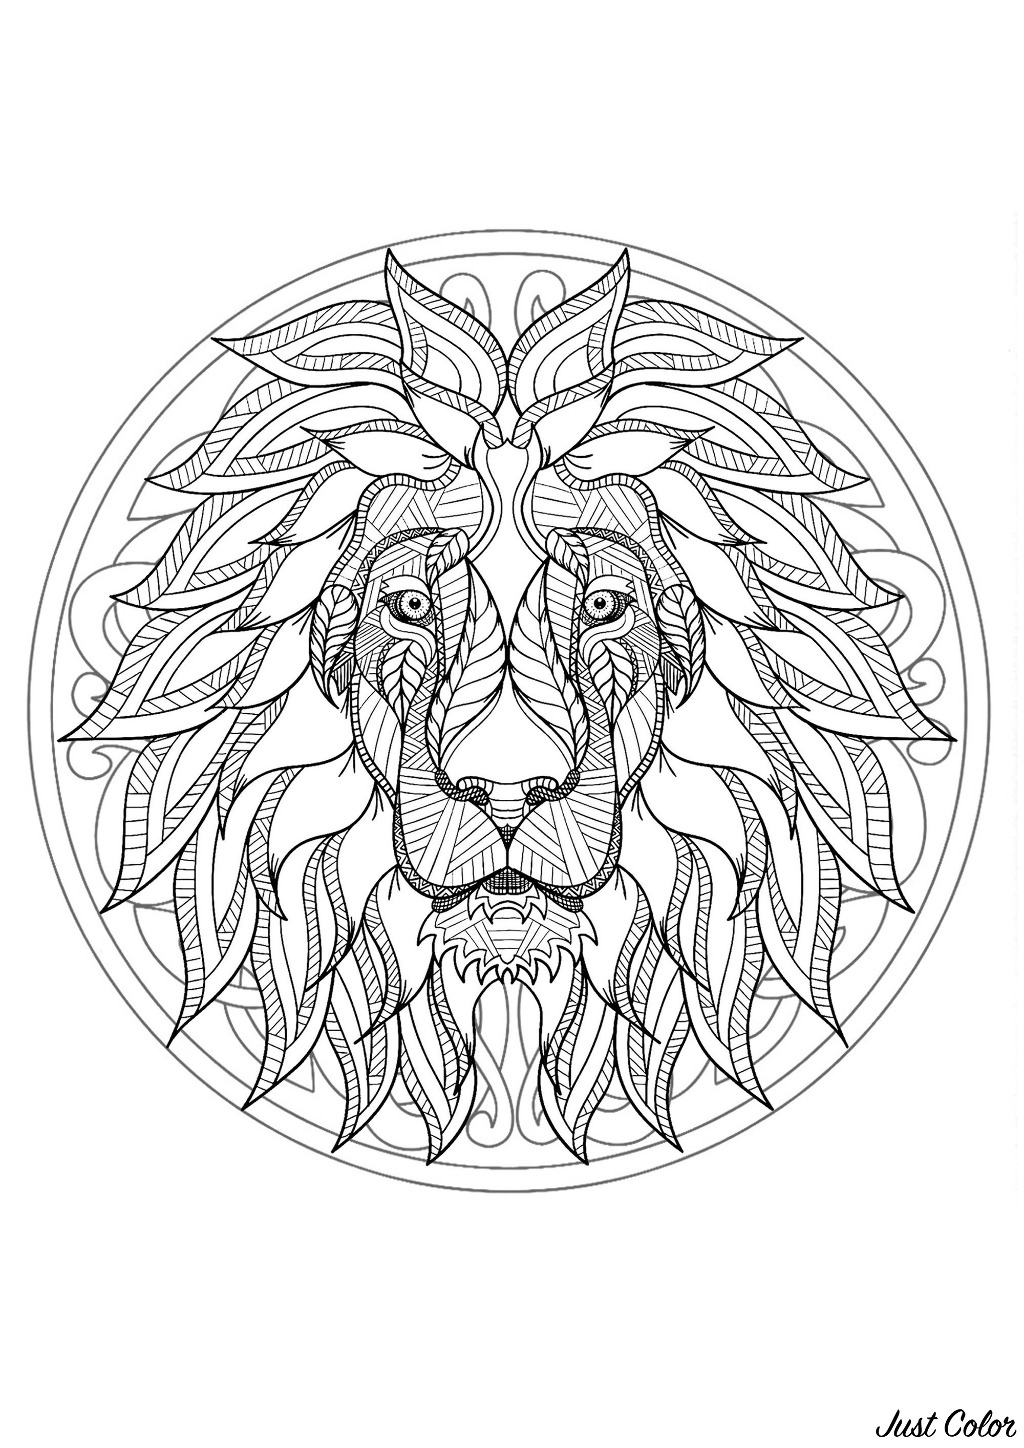 Mandala Color Pages Complex Mandala Coloring Page With Majestic Lion Head 1 Difficult